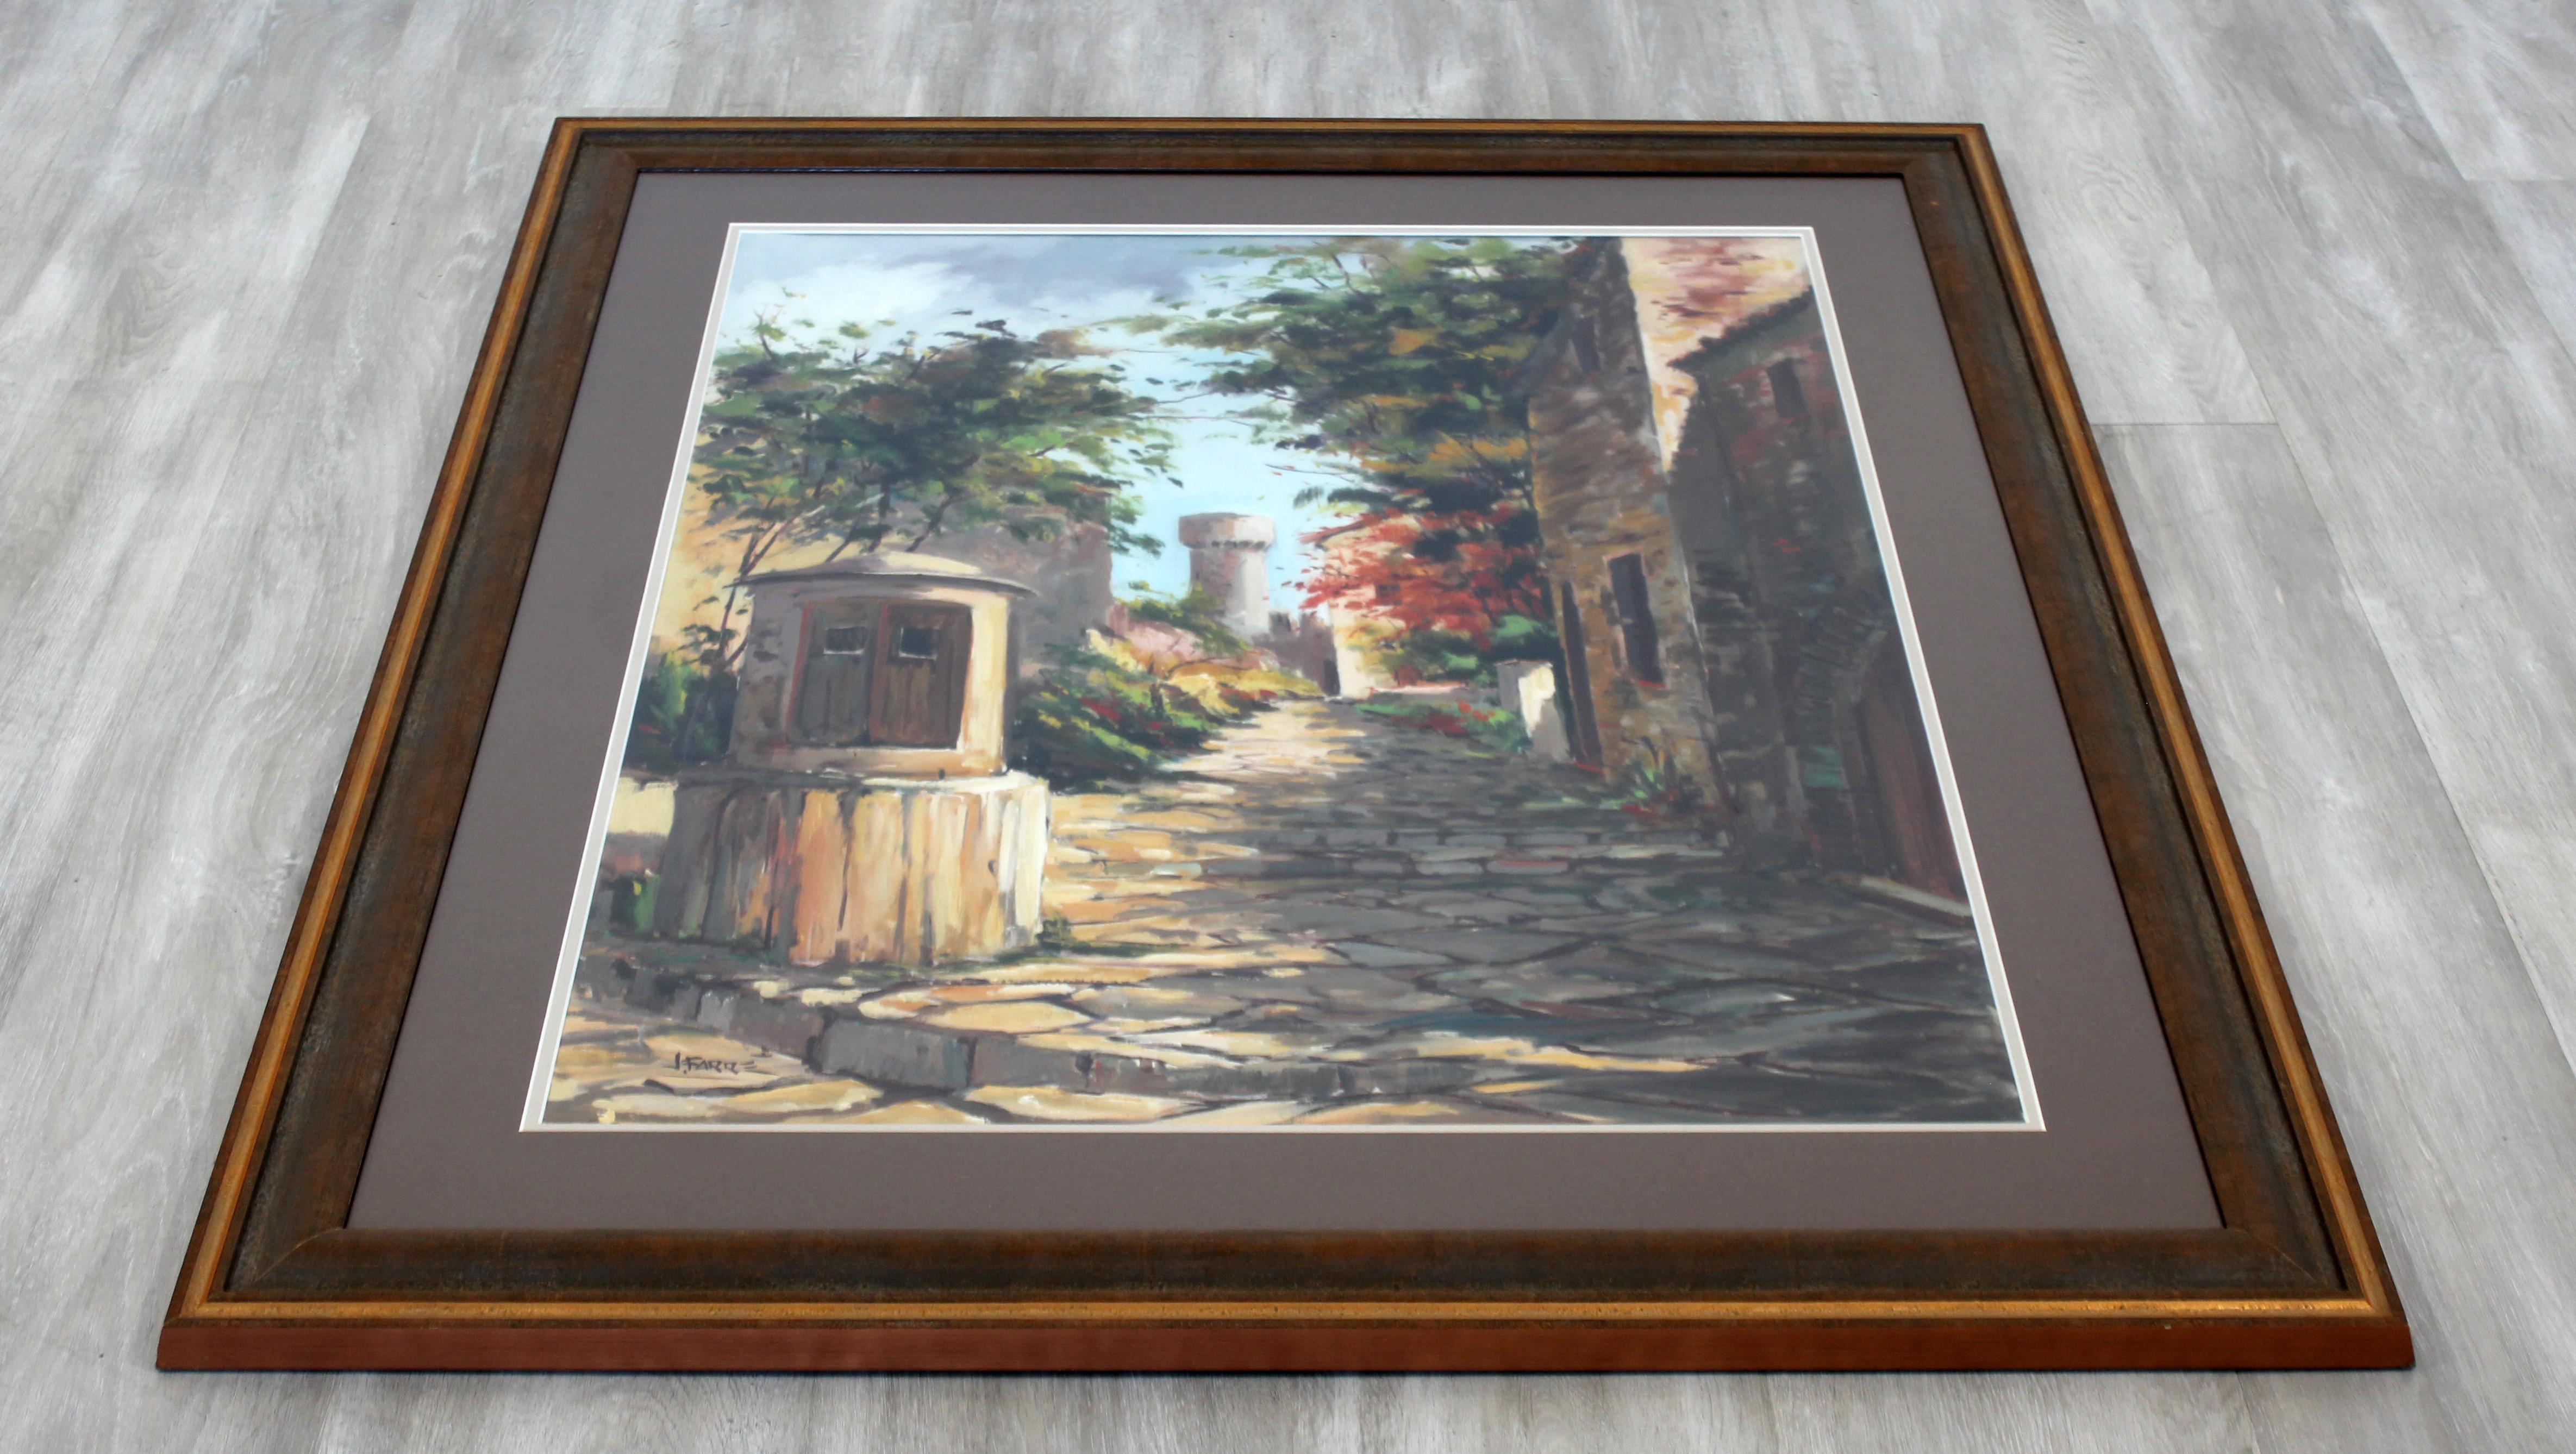 For your consideration is a marvelous, framed, Provincial street scene, painted in acrylic and signed J. Farre. In excellent condition. The dimensions are 35.5